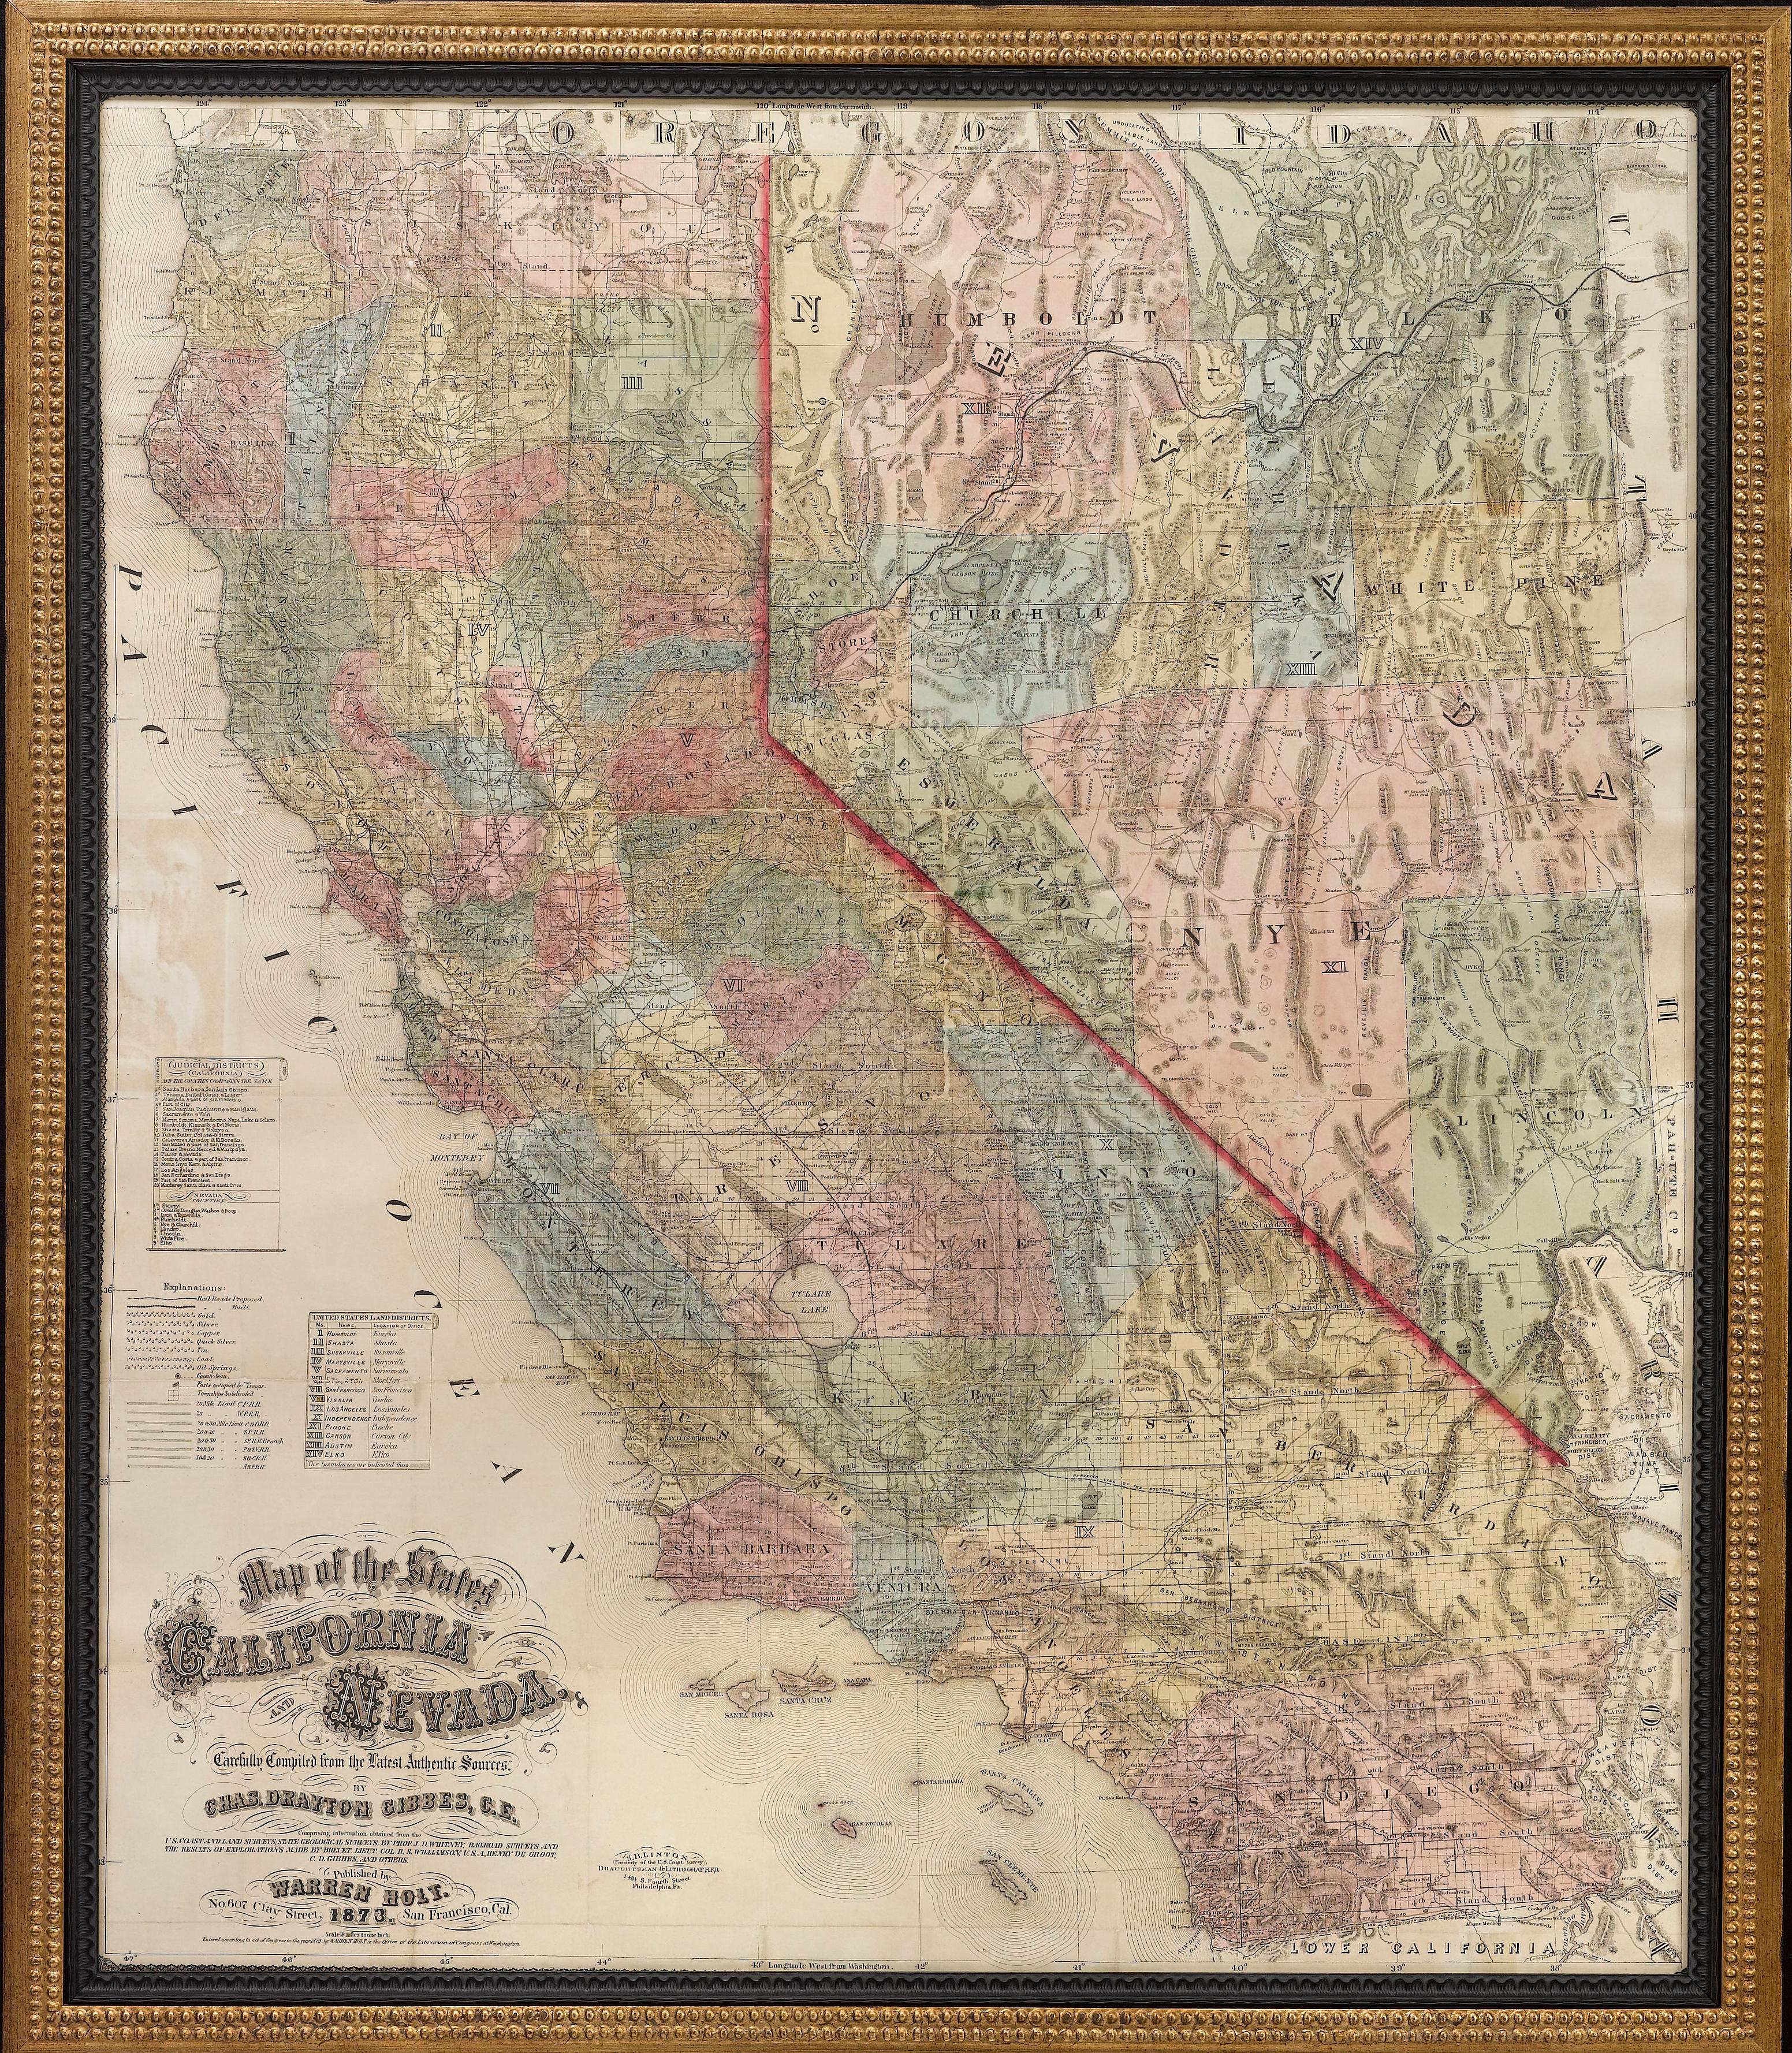 Presented is Warren Holt and Charles Drayton Gibbes' 1873 “Map of California and Nevada.” This map is considered to be one of the finest large-scale maps of California to appear in the second half of the 19th century. Depicting all of California and